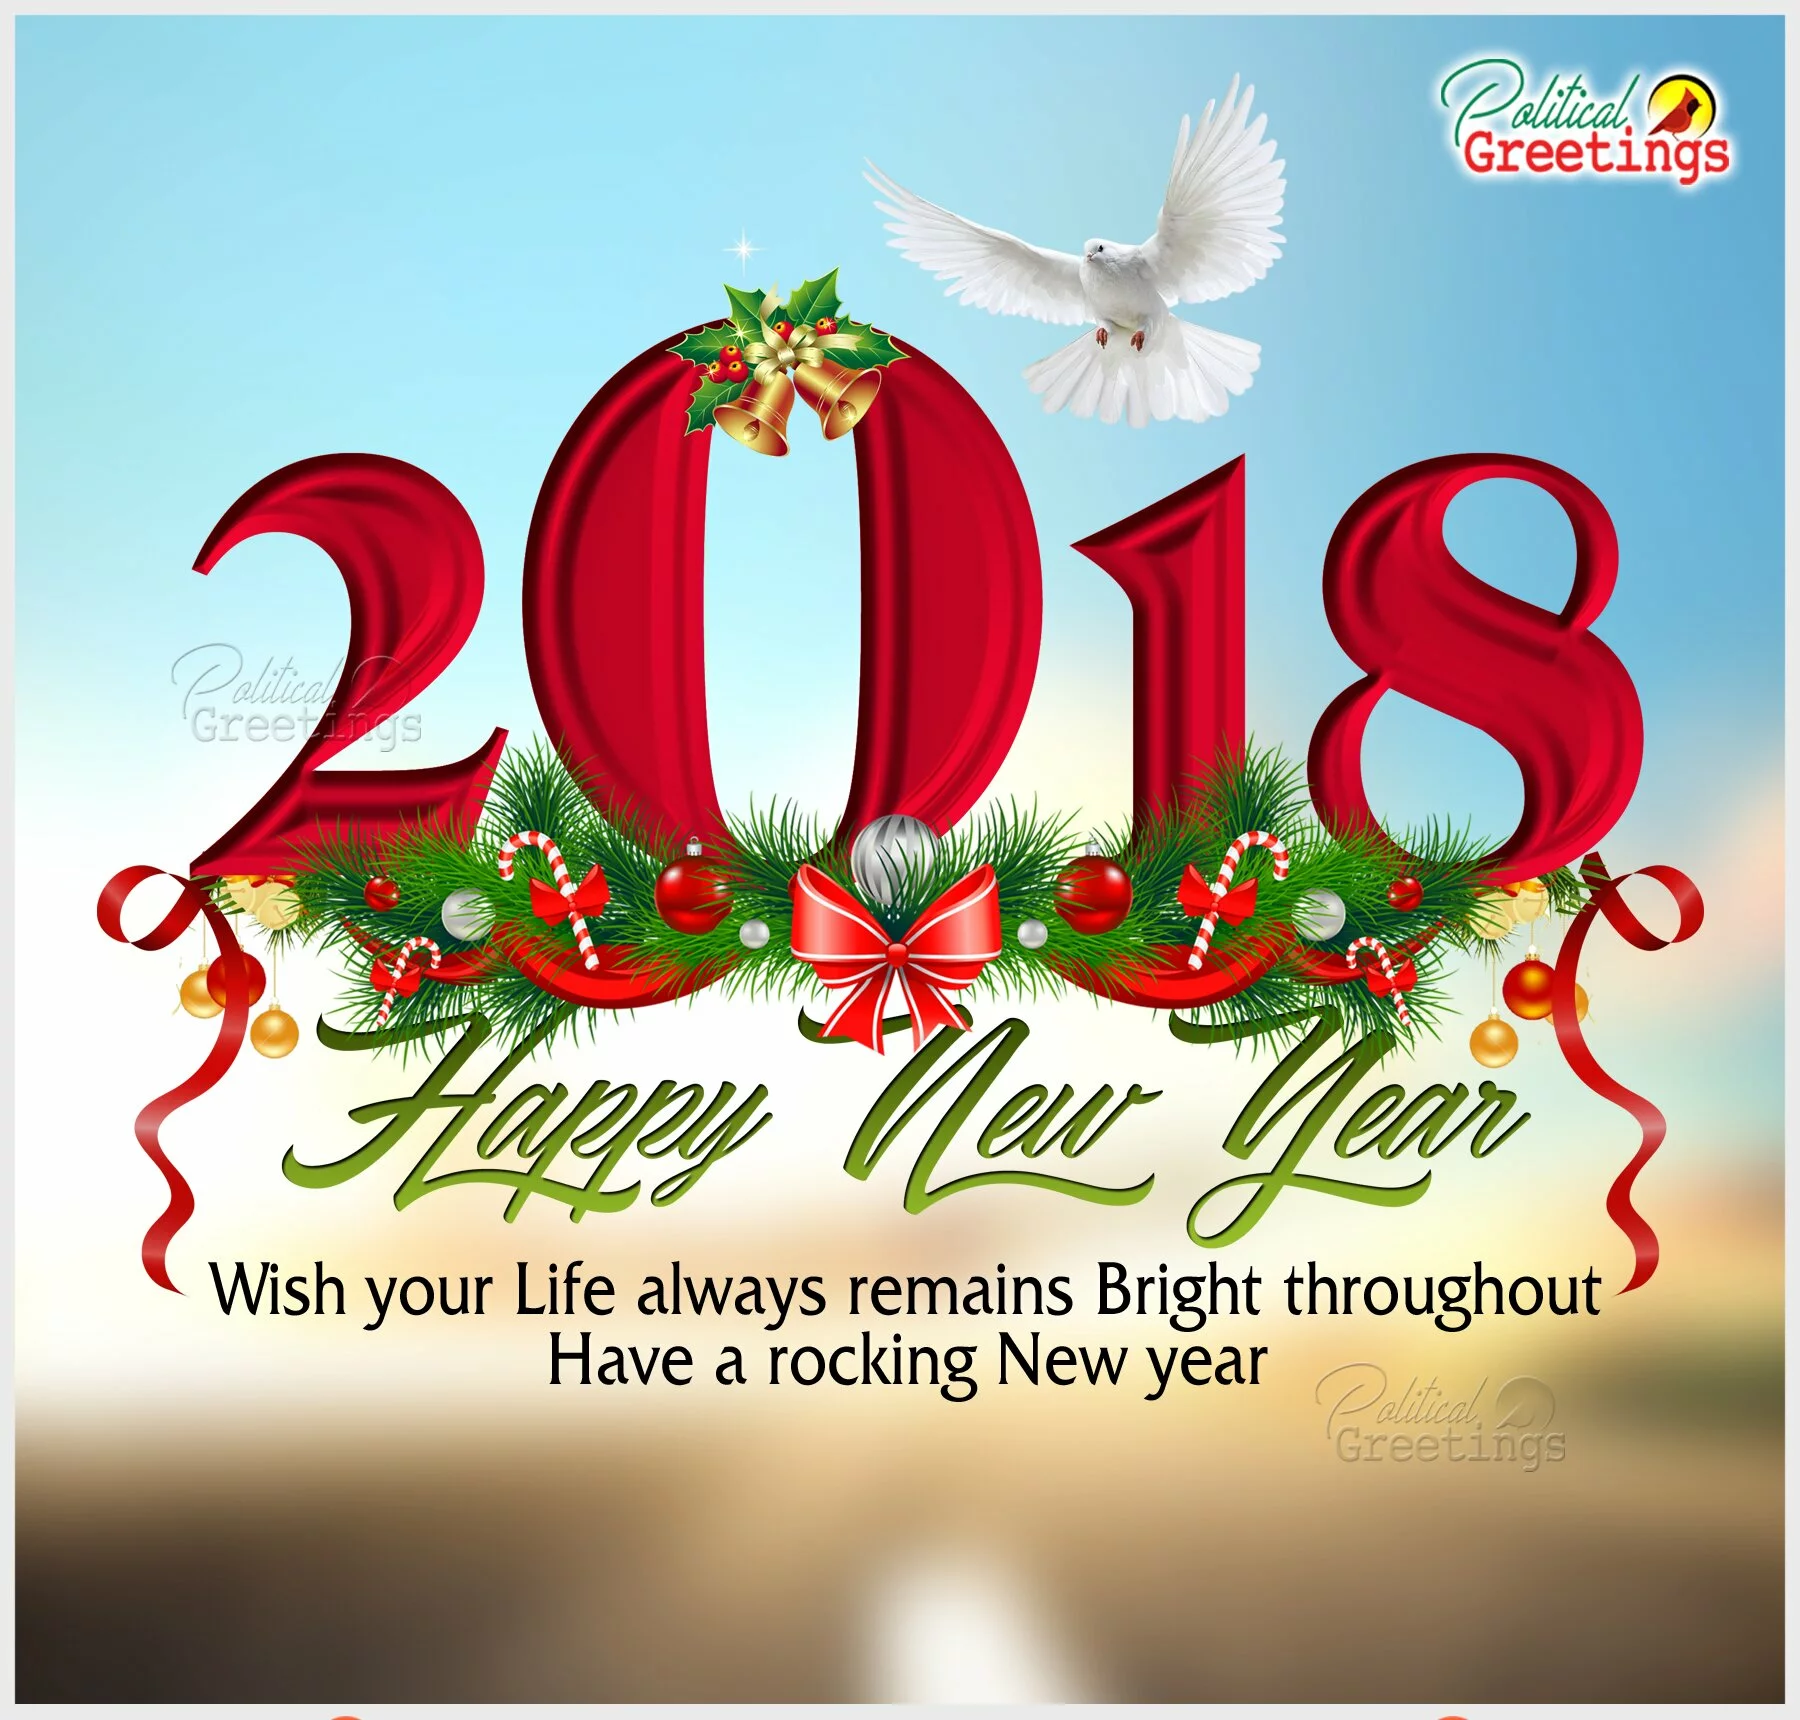 Happy New Year 2018 Quotes, Wishes, Messages & Greetings